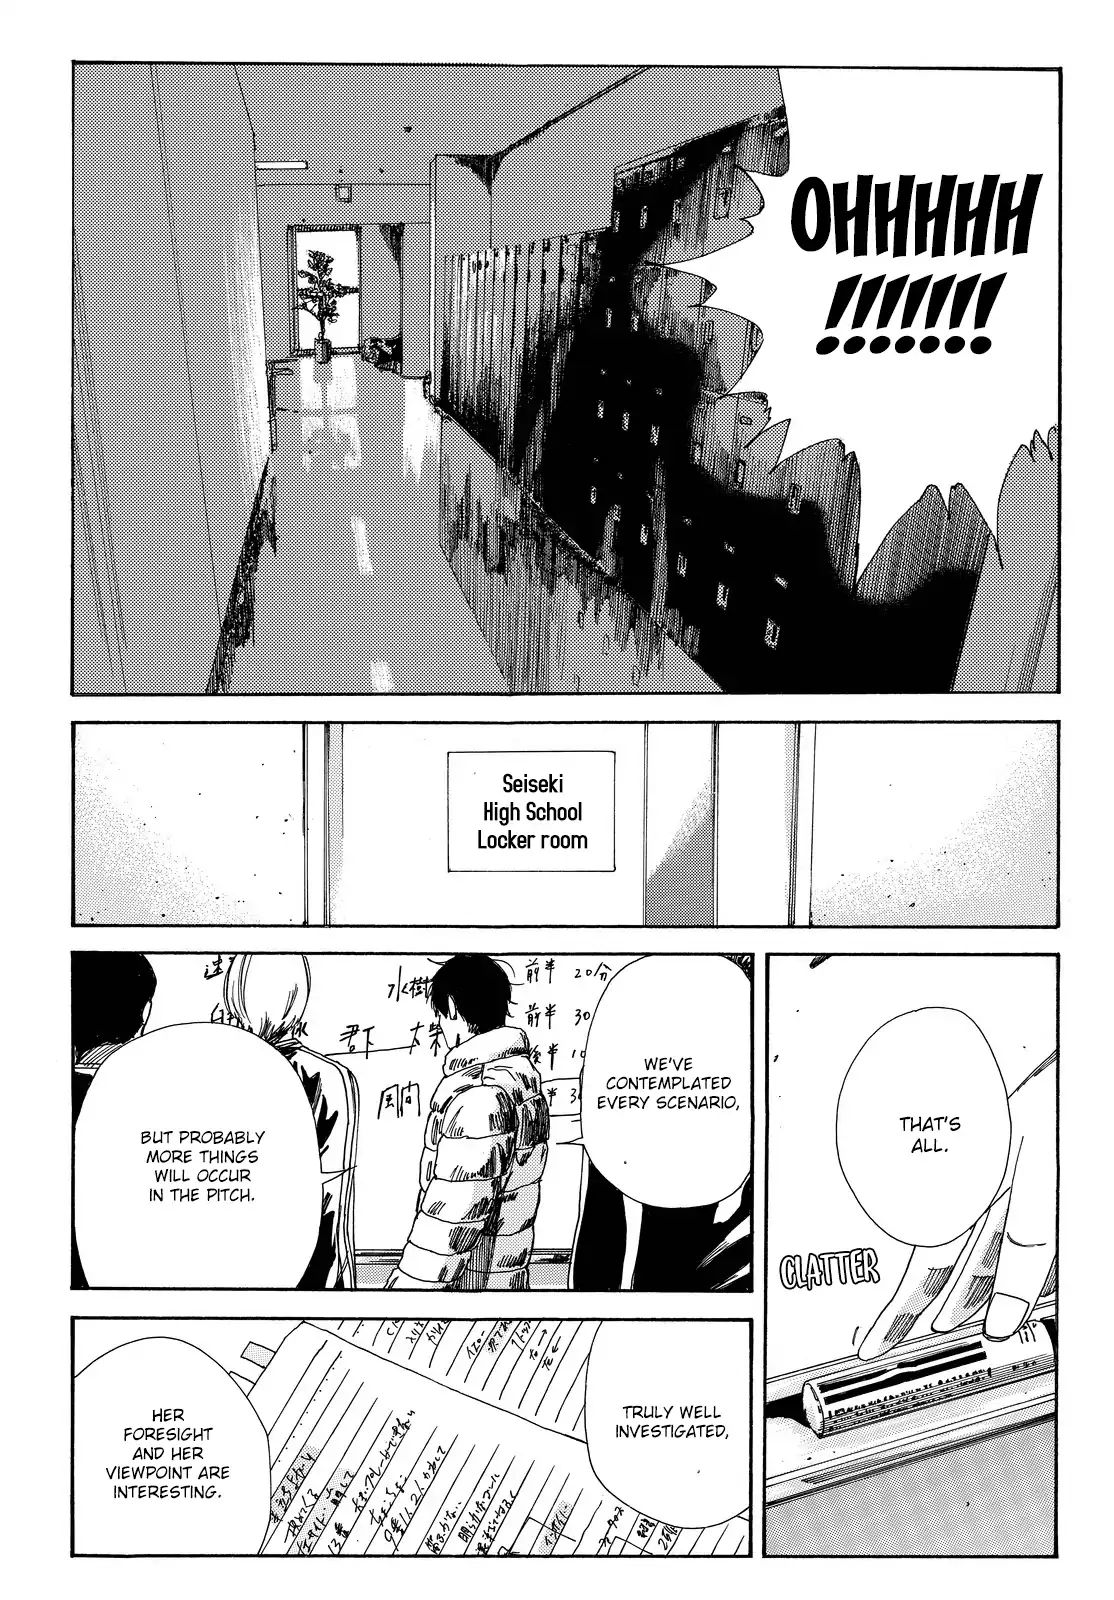 Days Vol.20 Chapter 175: Trust and Respect